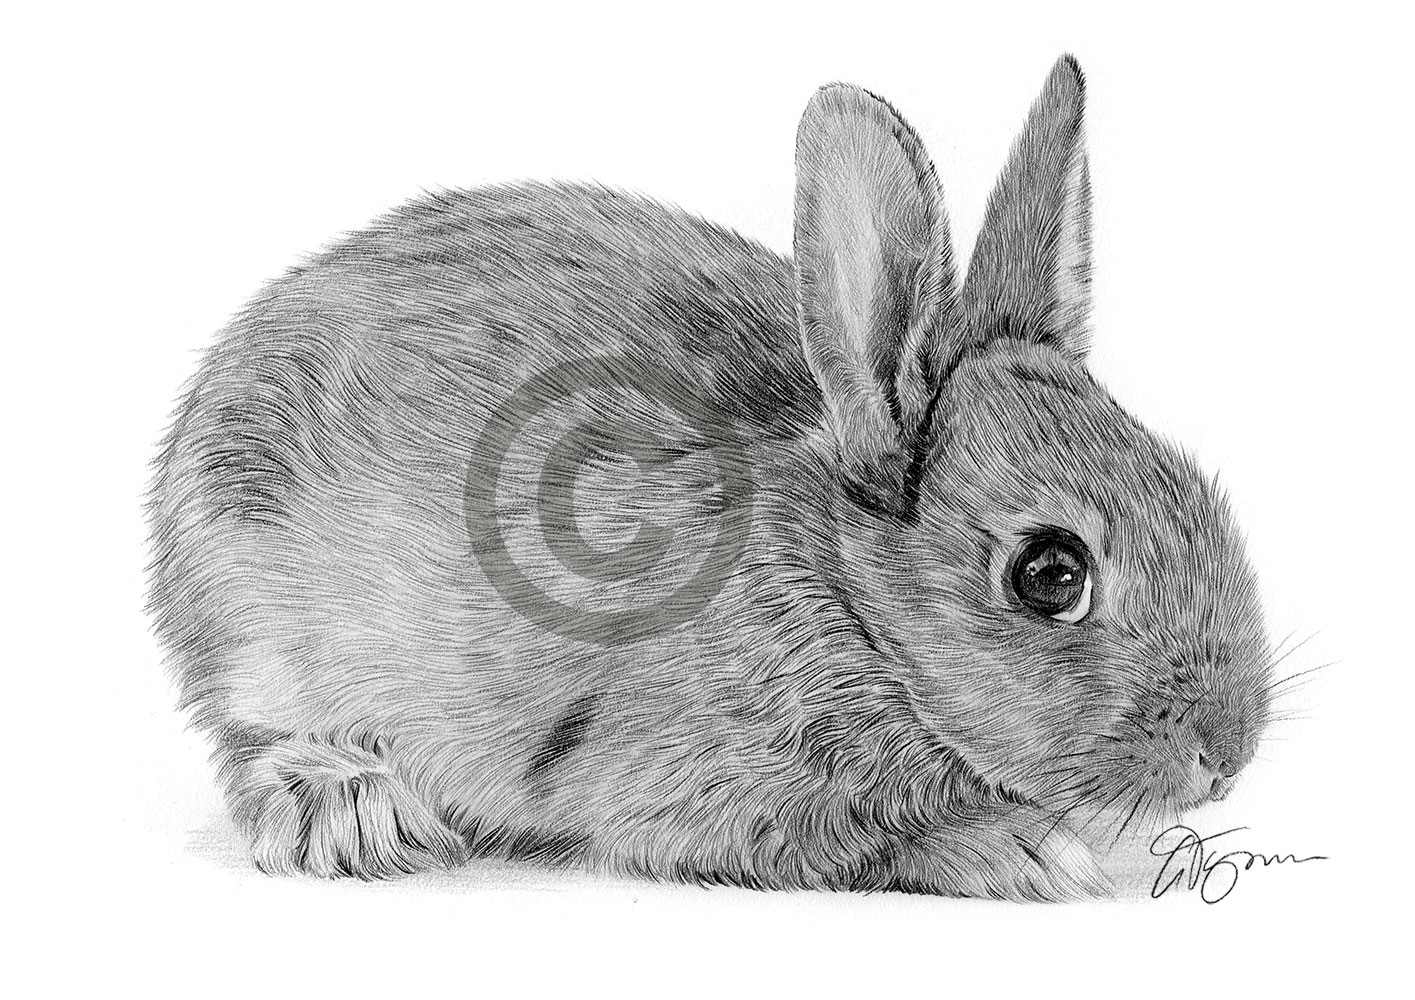 Pencil drawing of a baby rabbit by artist Gary Tymon